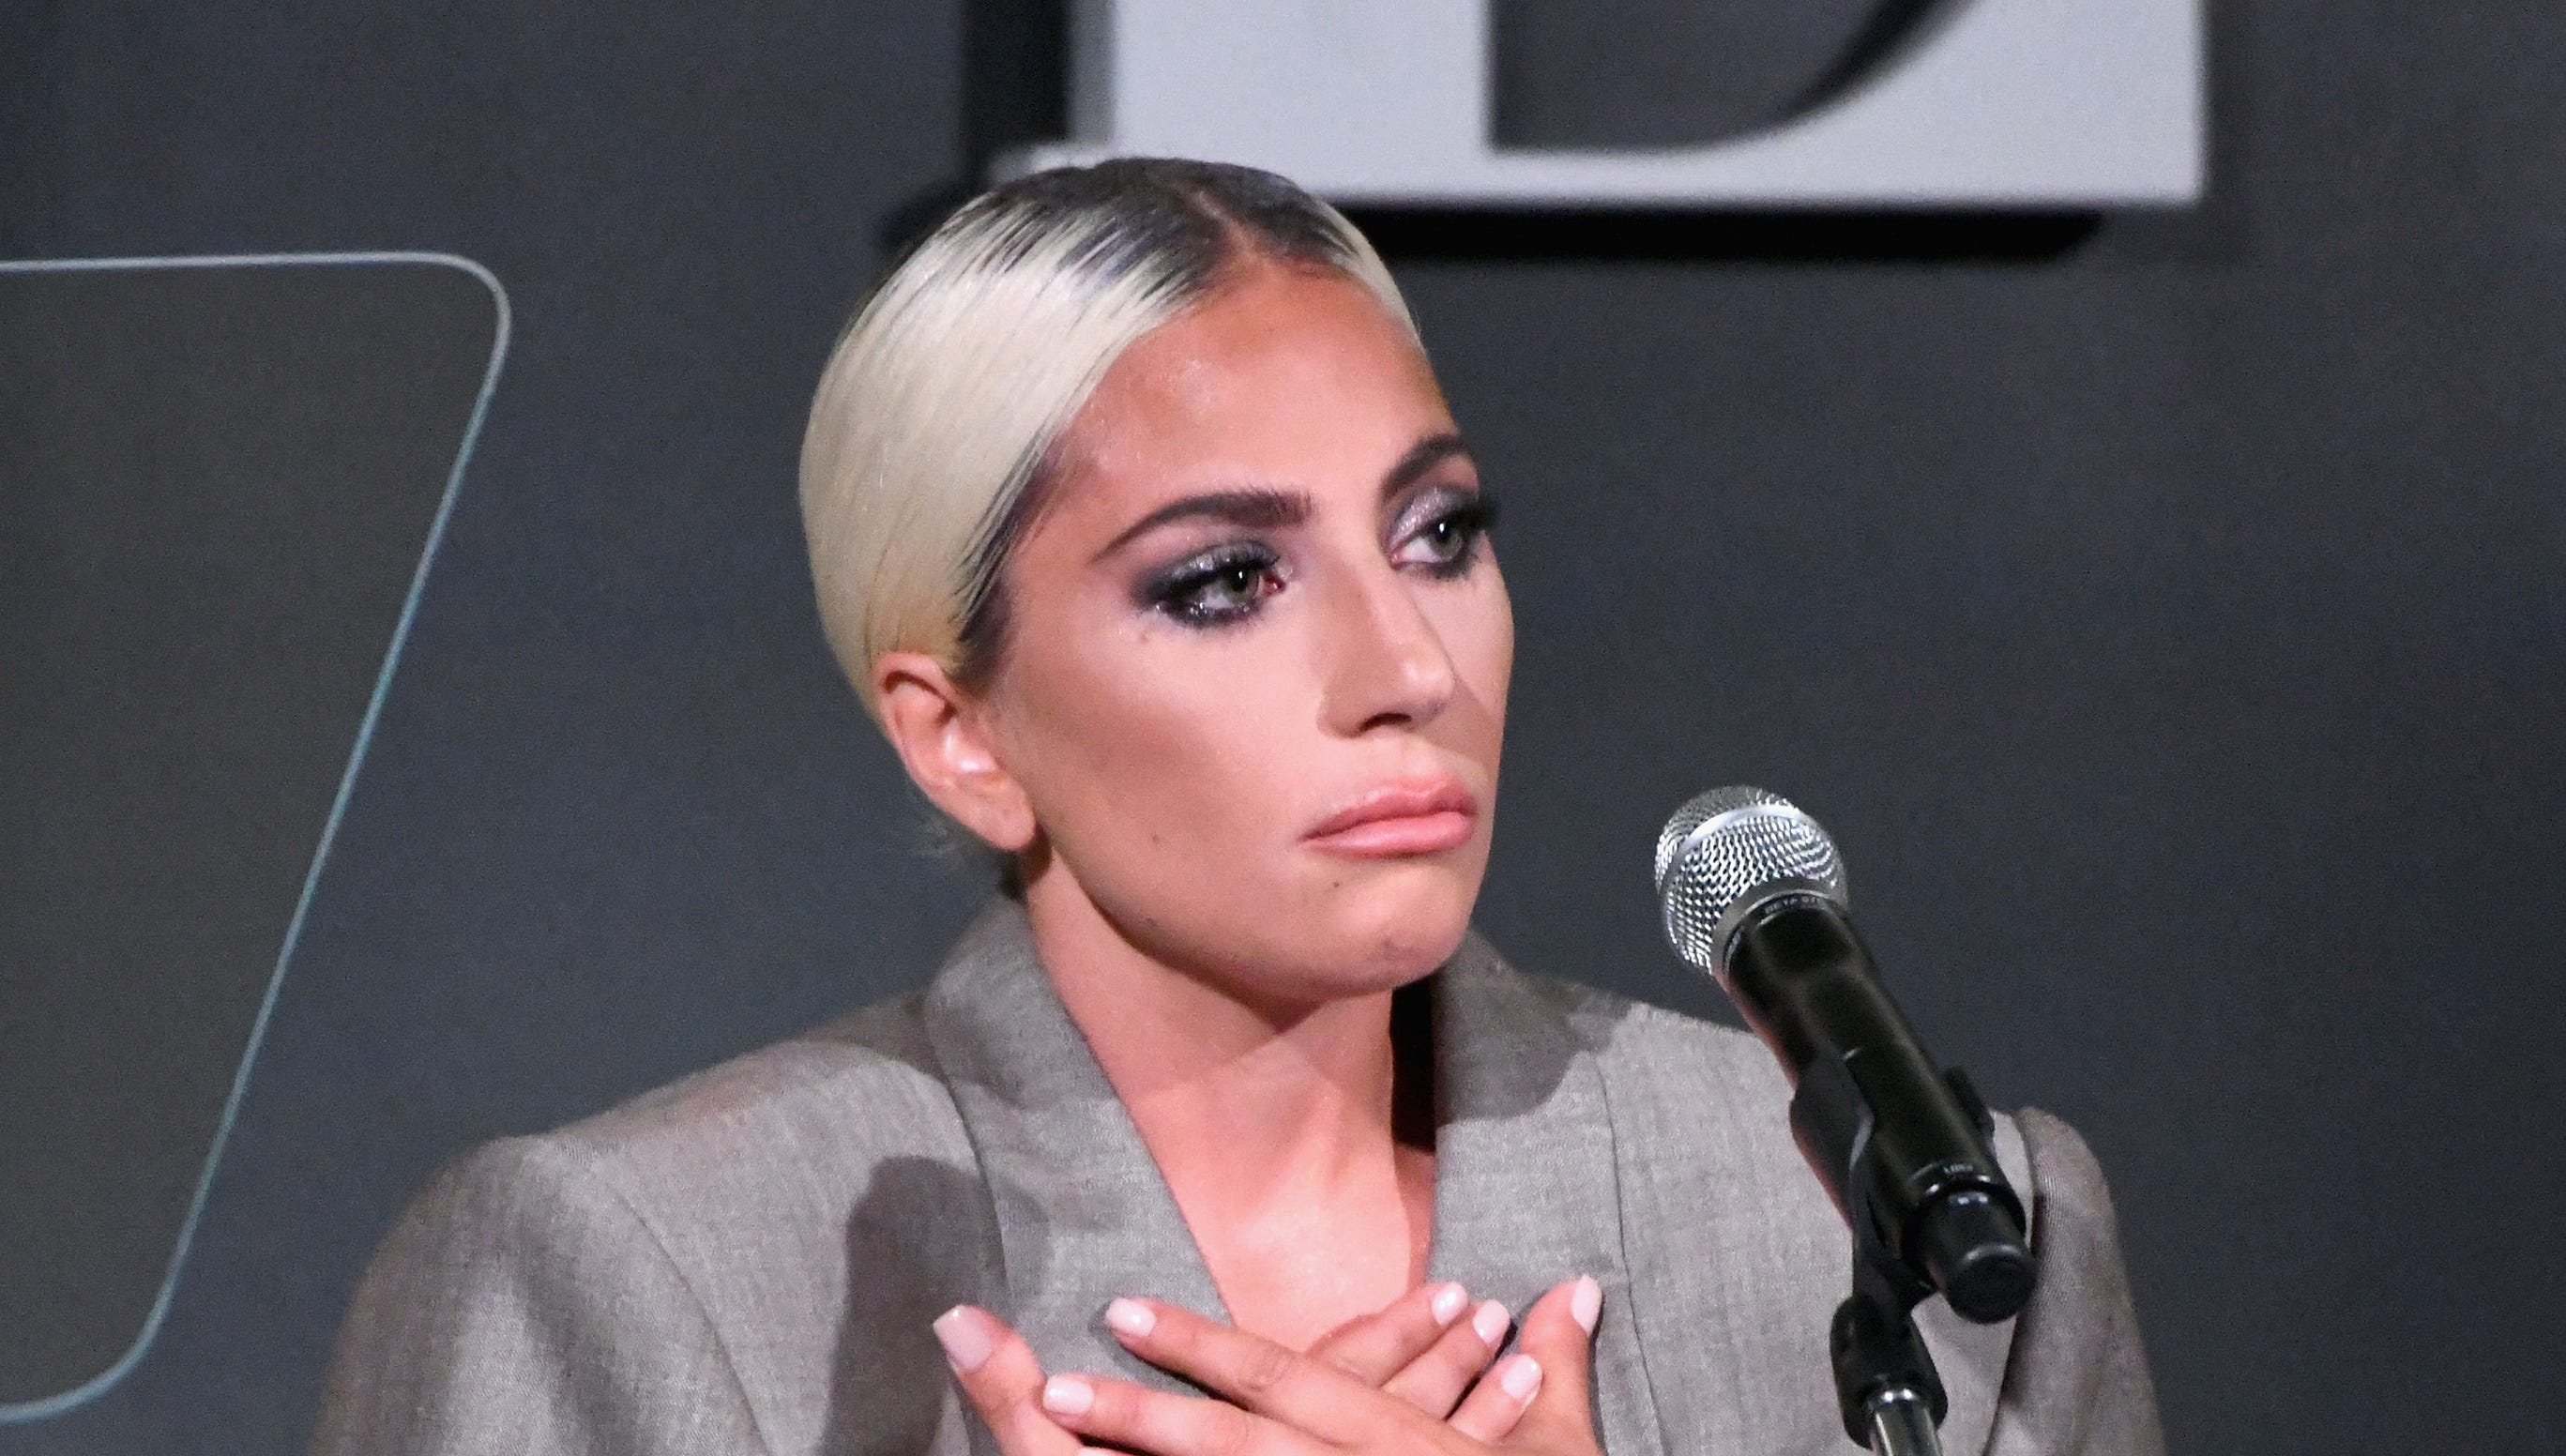 Lady Gaga Reveals Reason Behind Oversize Suit In Powerful Speech 3137